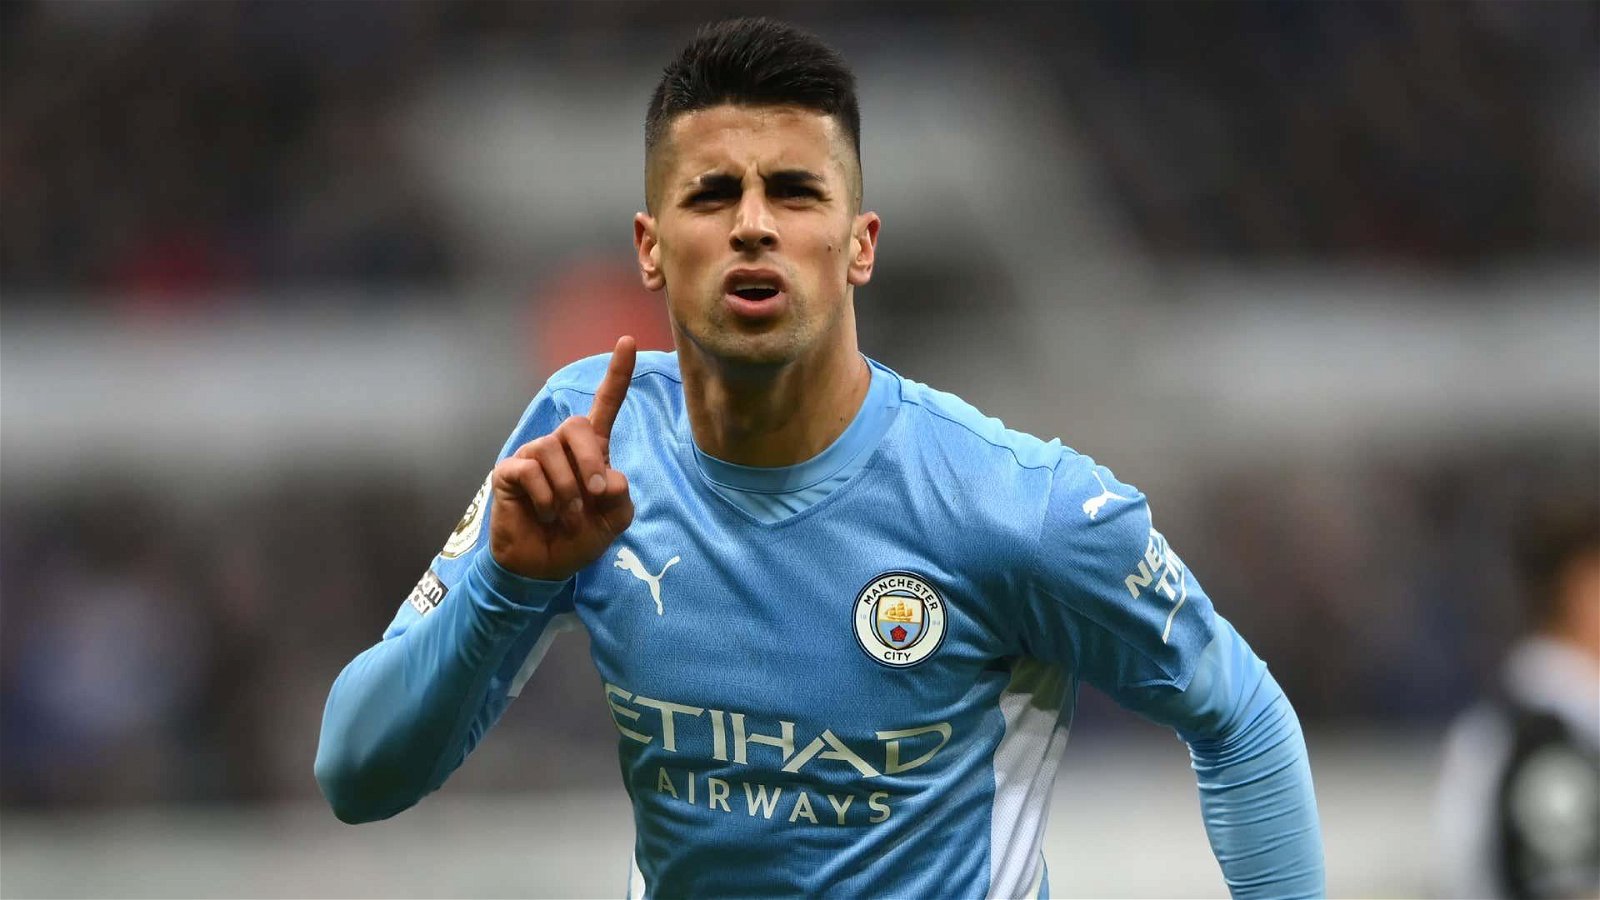 Barcelona look to overcome all obstacles and announce Joao Cancelo deal on deadline day